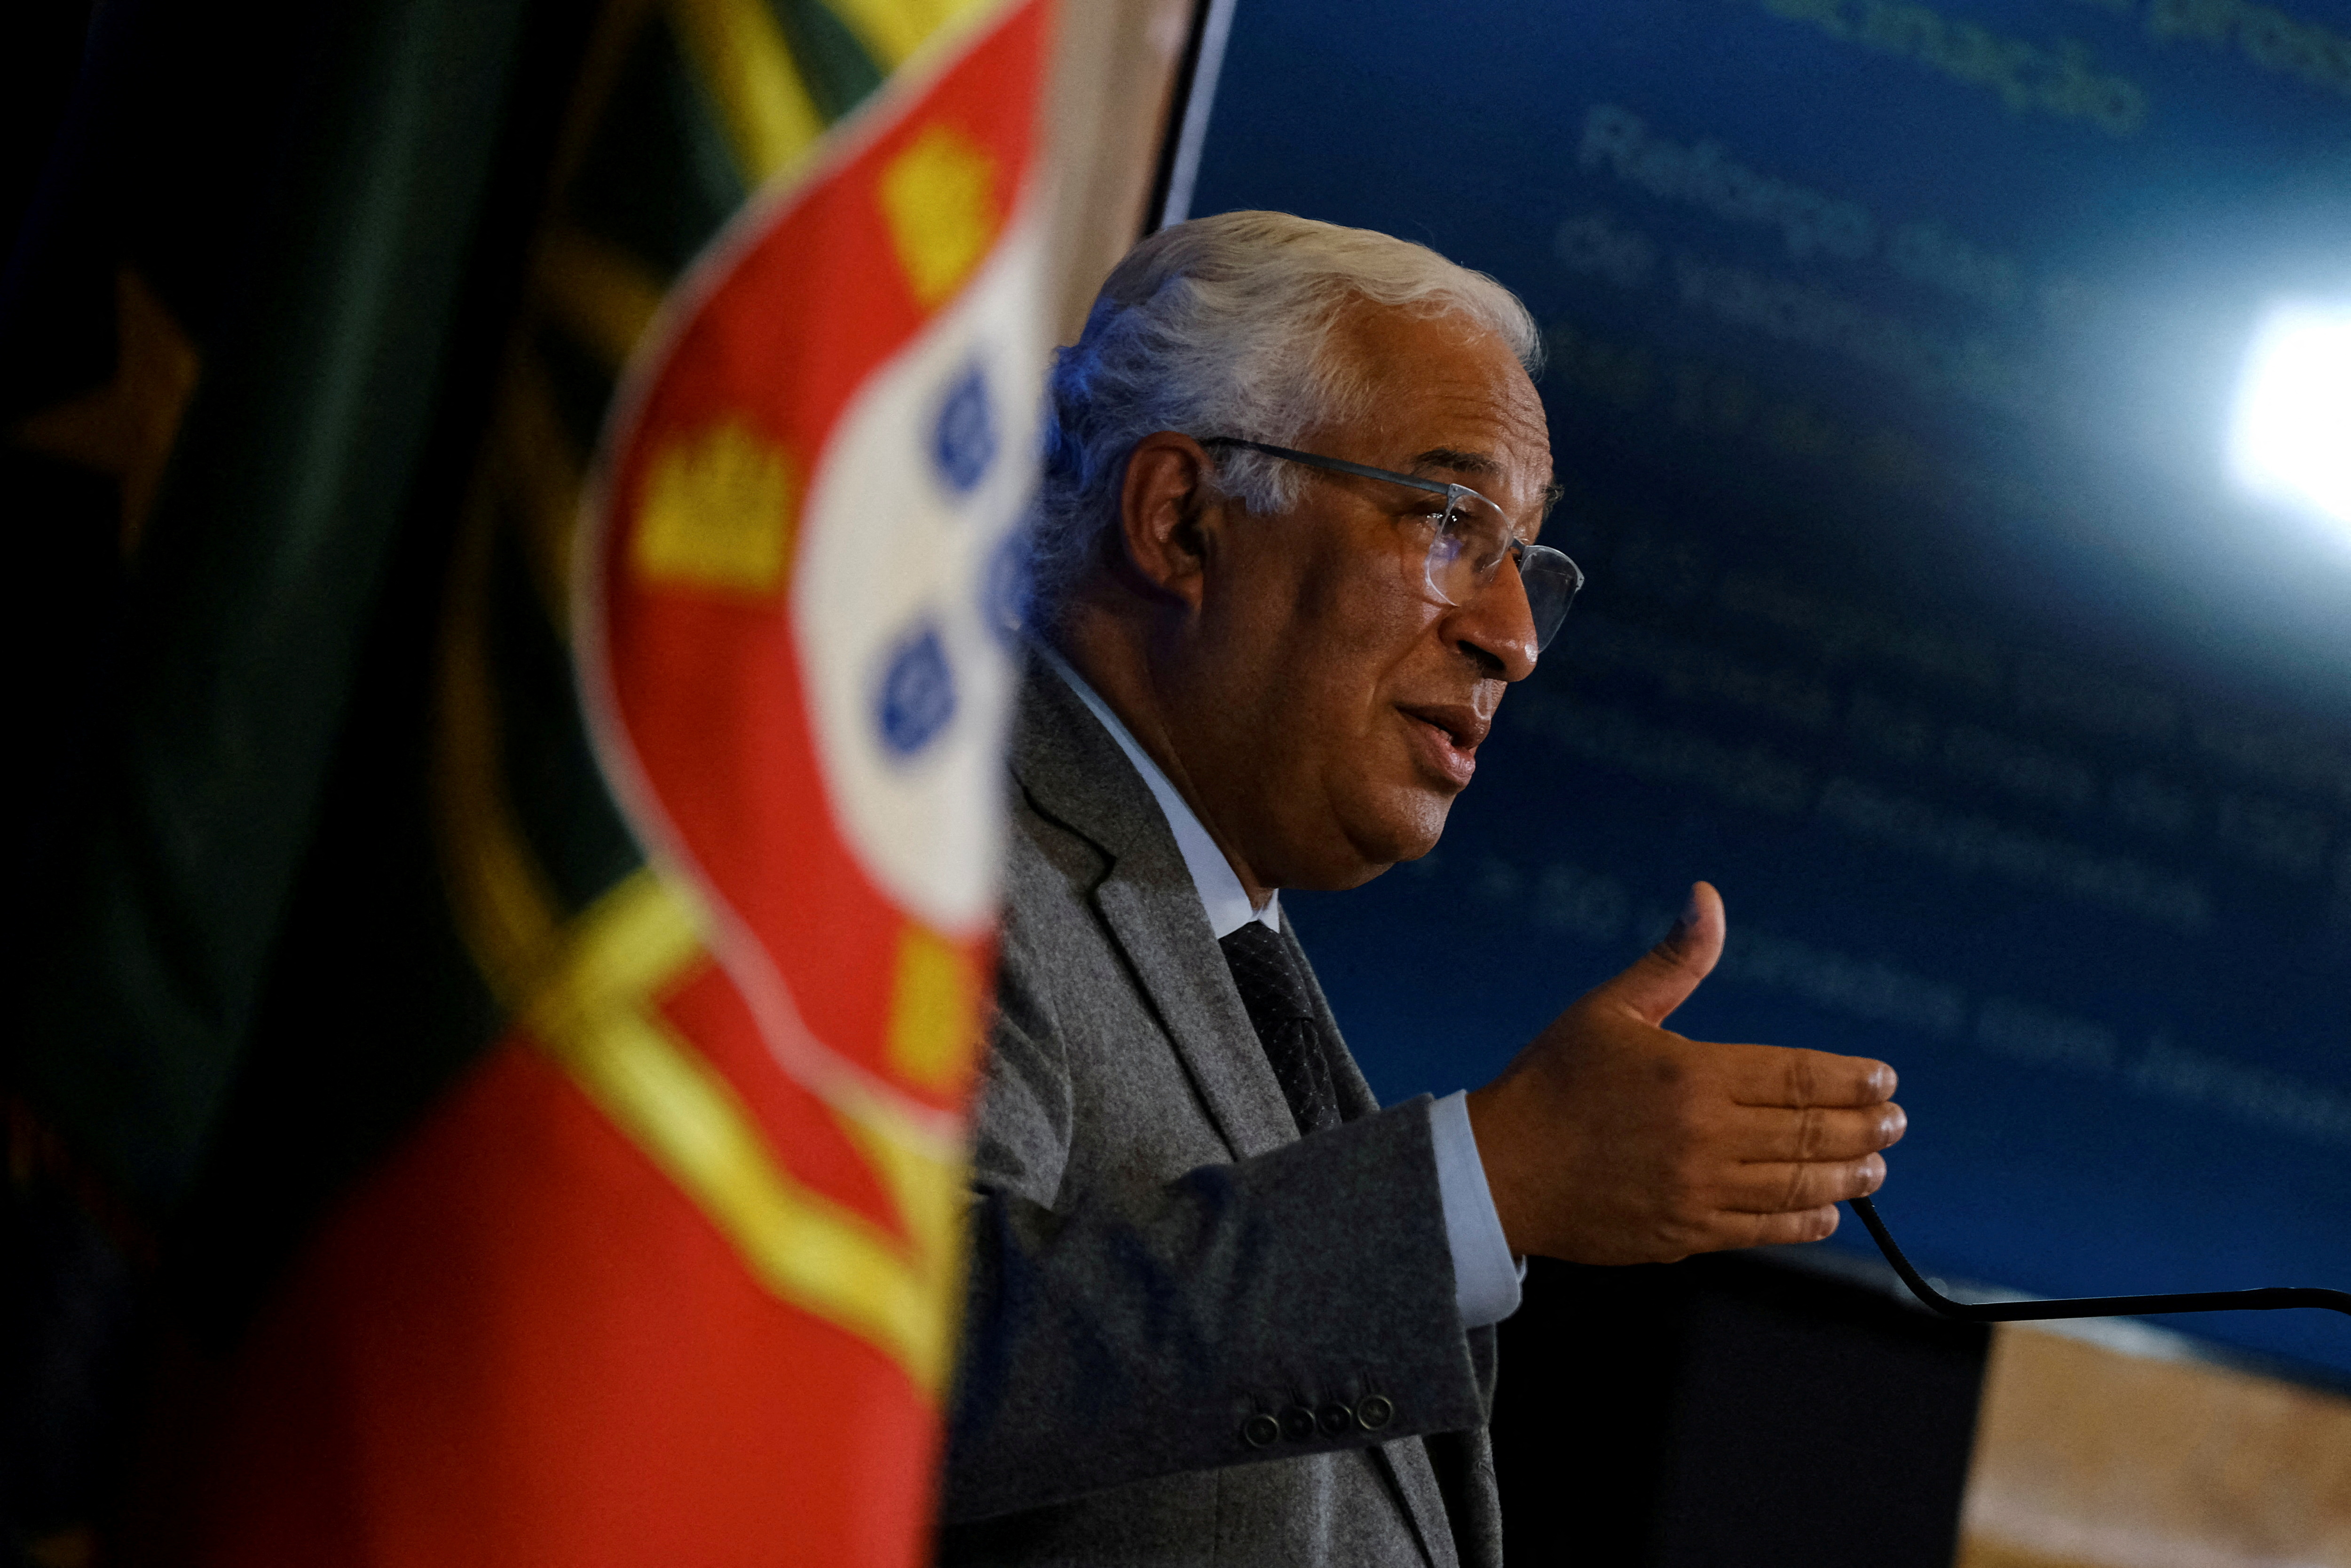 Portugal's Prime Minister Antonio Costa speaks during a news conference to announce the new measures amid the coronavirus disease (COVID-19) pandemic, at Ajuda Palace in Lisbon